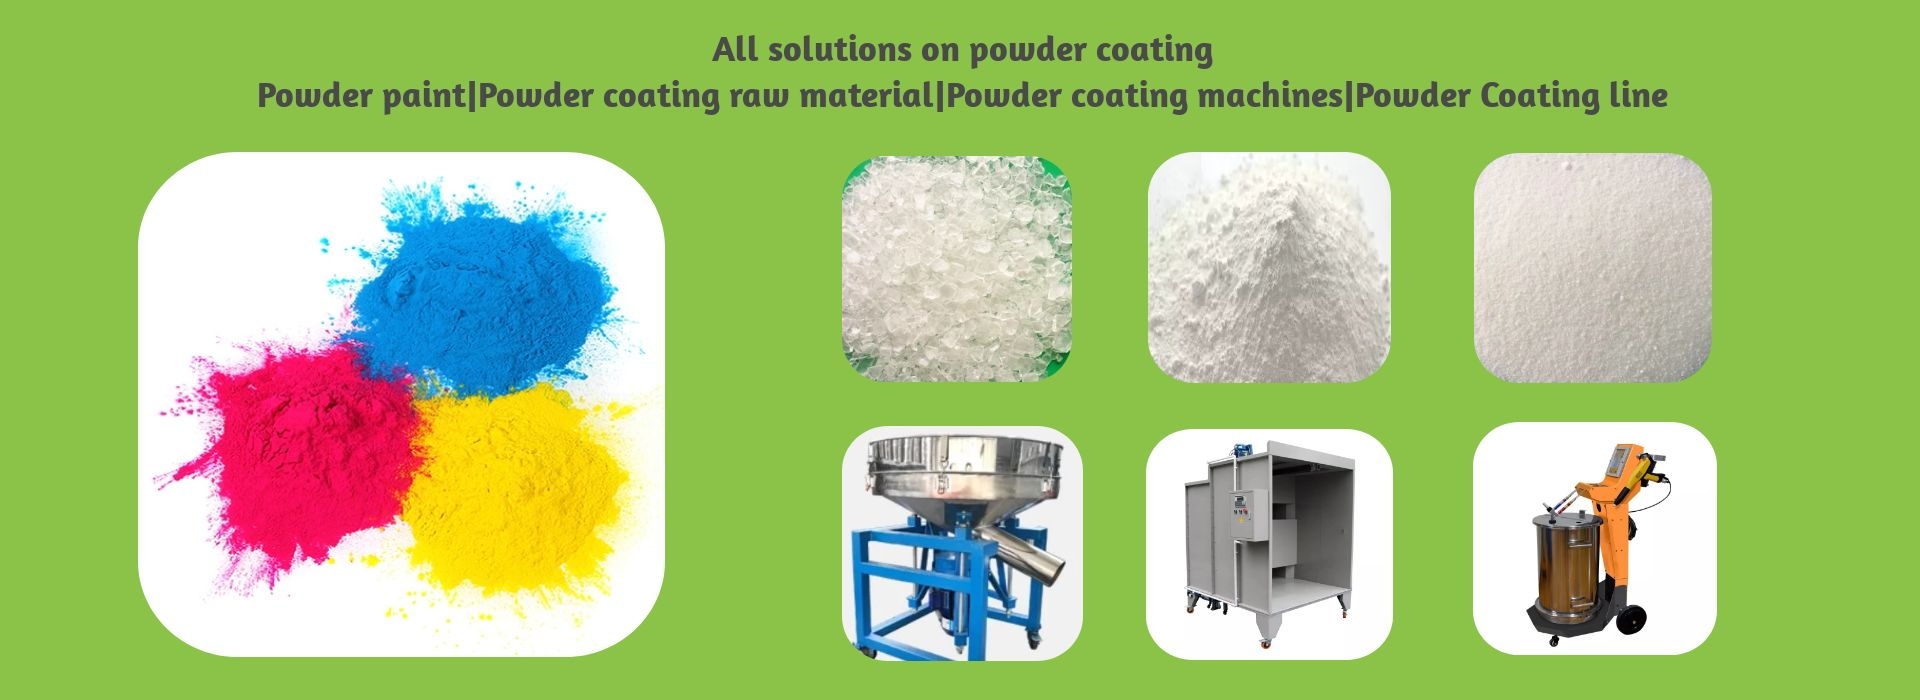 Based on our basic job manufacturing powder coating, we also provide more solutions on powder coating, like powder coating raw material, powder coating machines